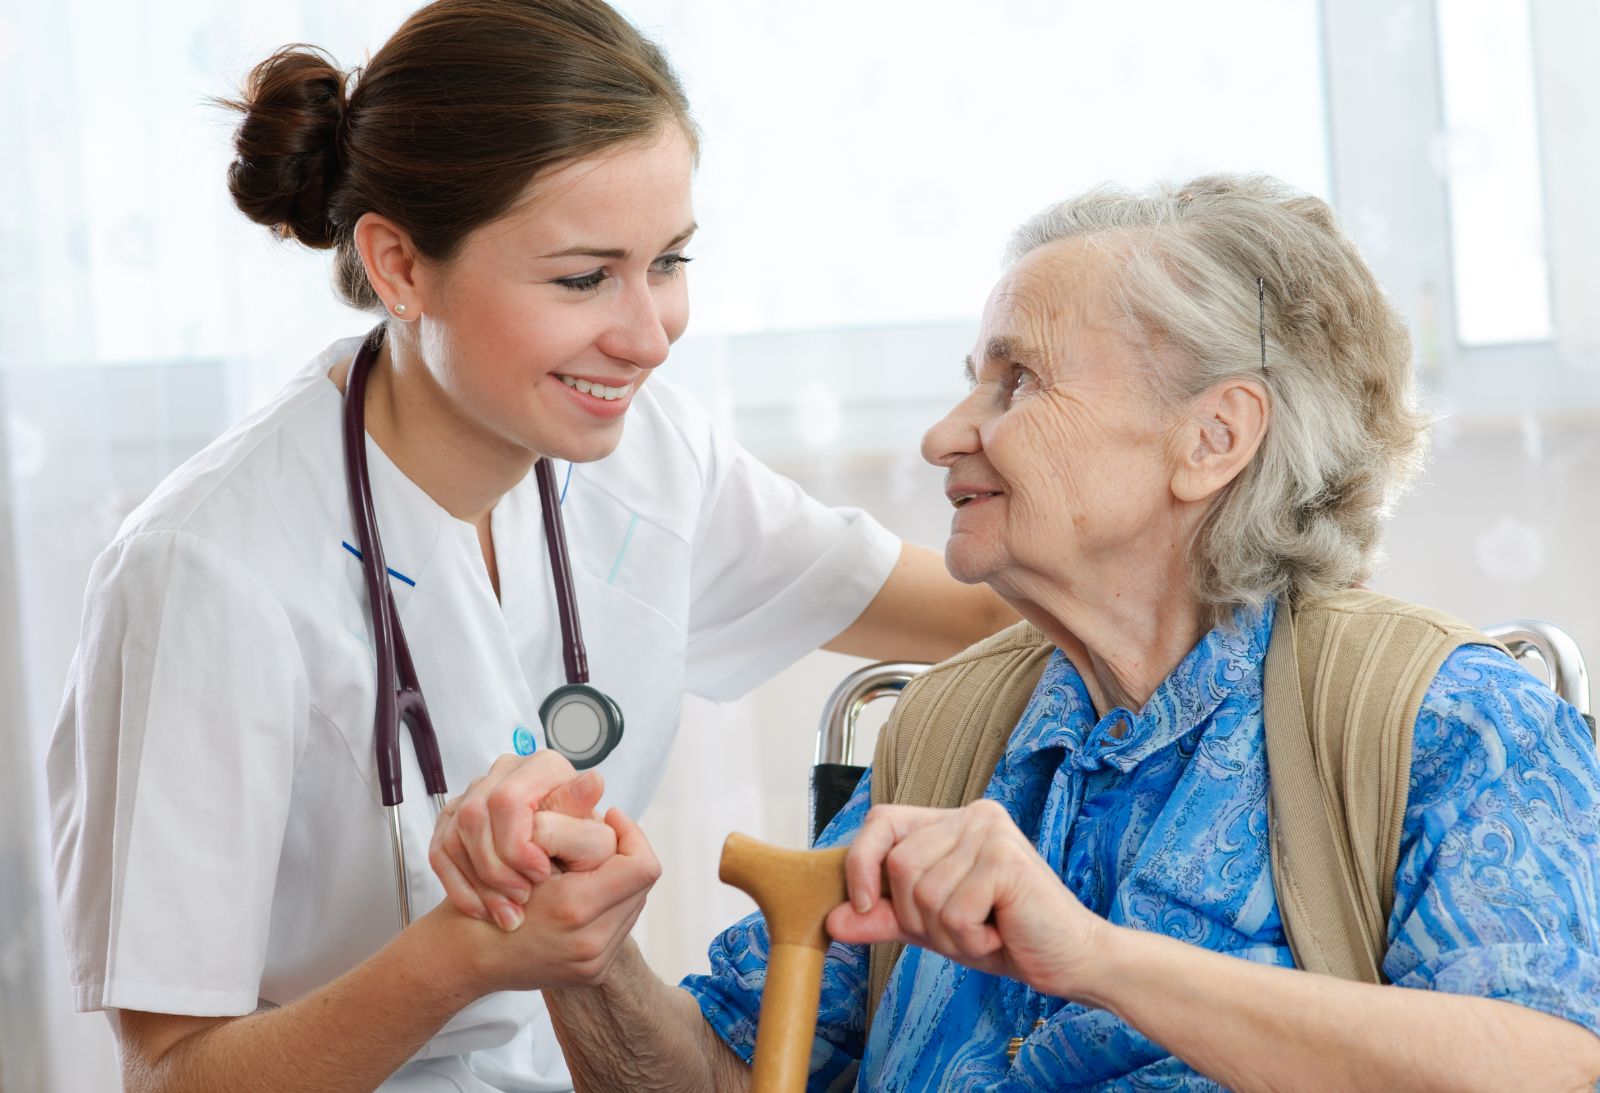 What Does a Patient Care Assistant Do in a Hospital?